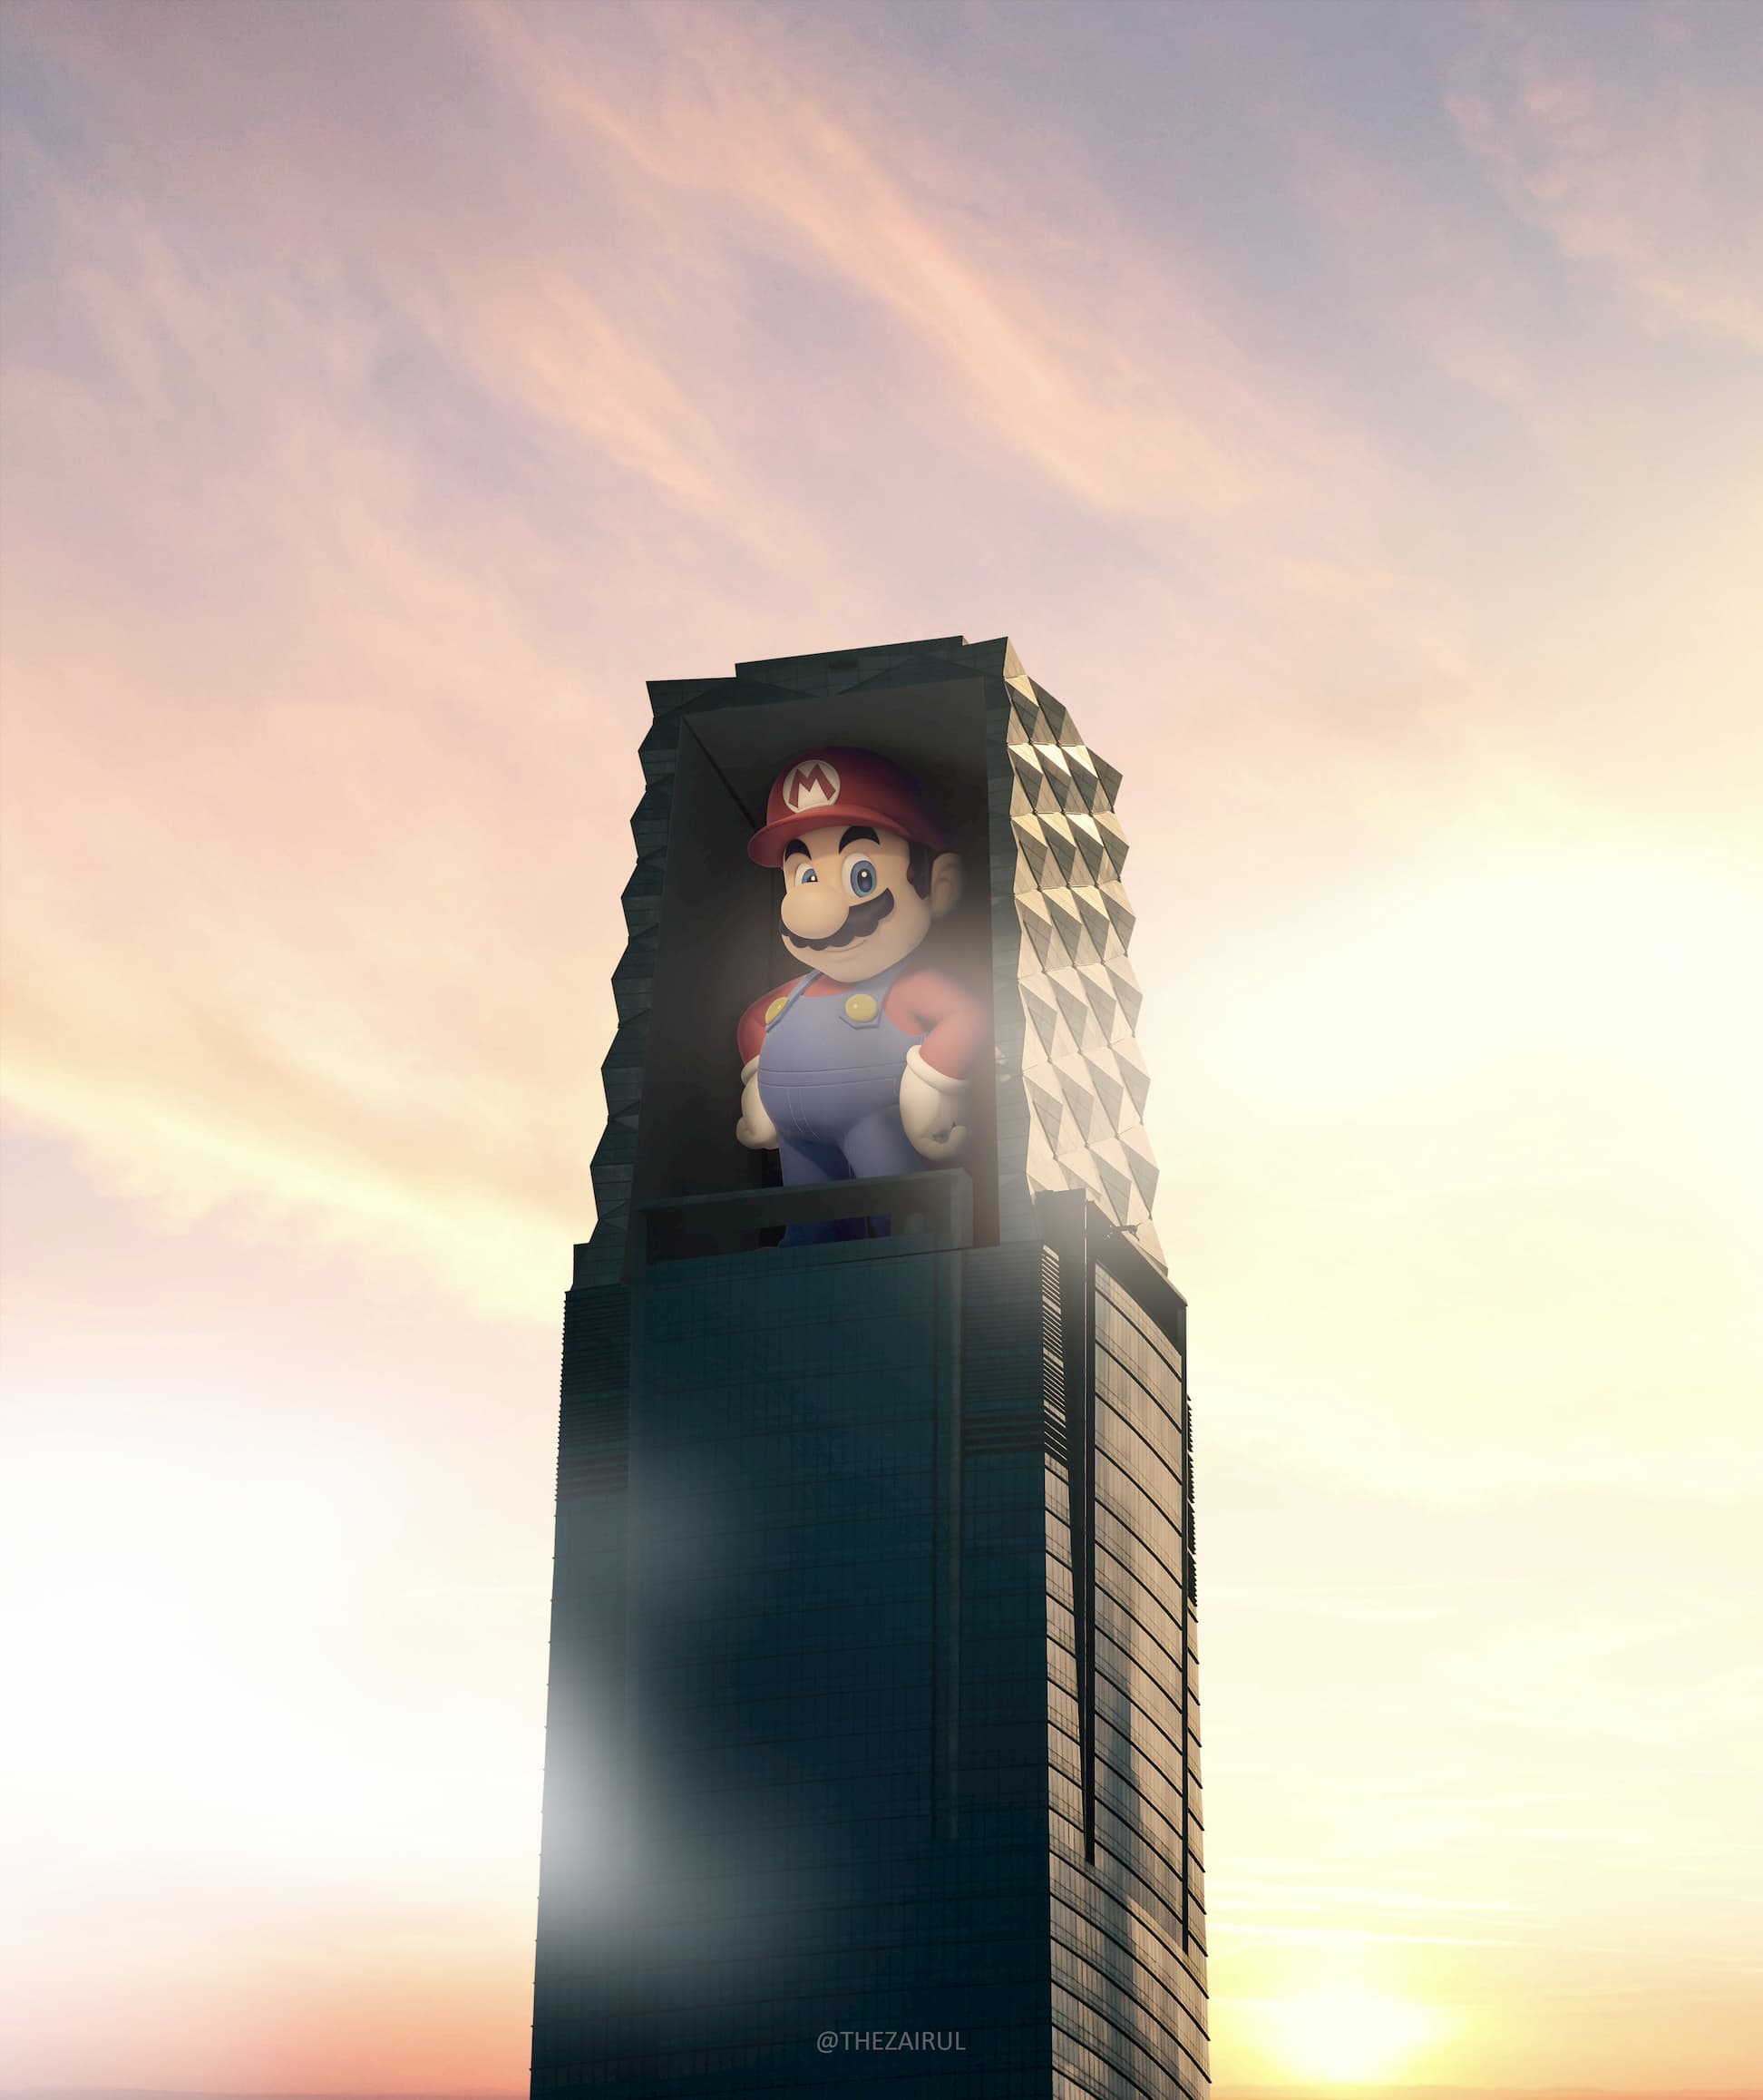 Photoshopped image of mario in the Exchange 106